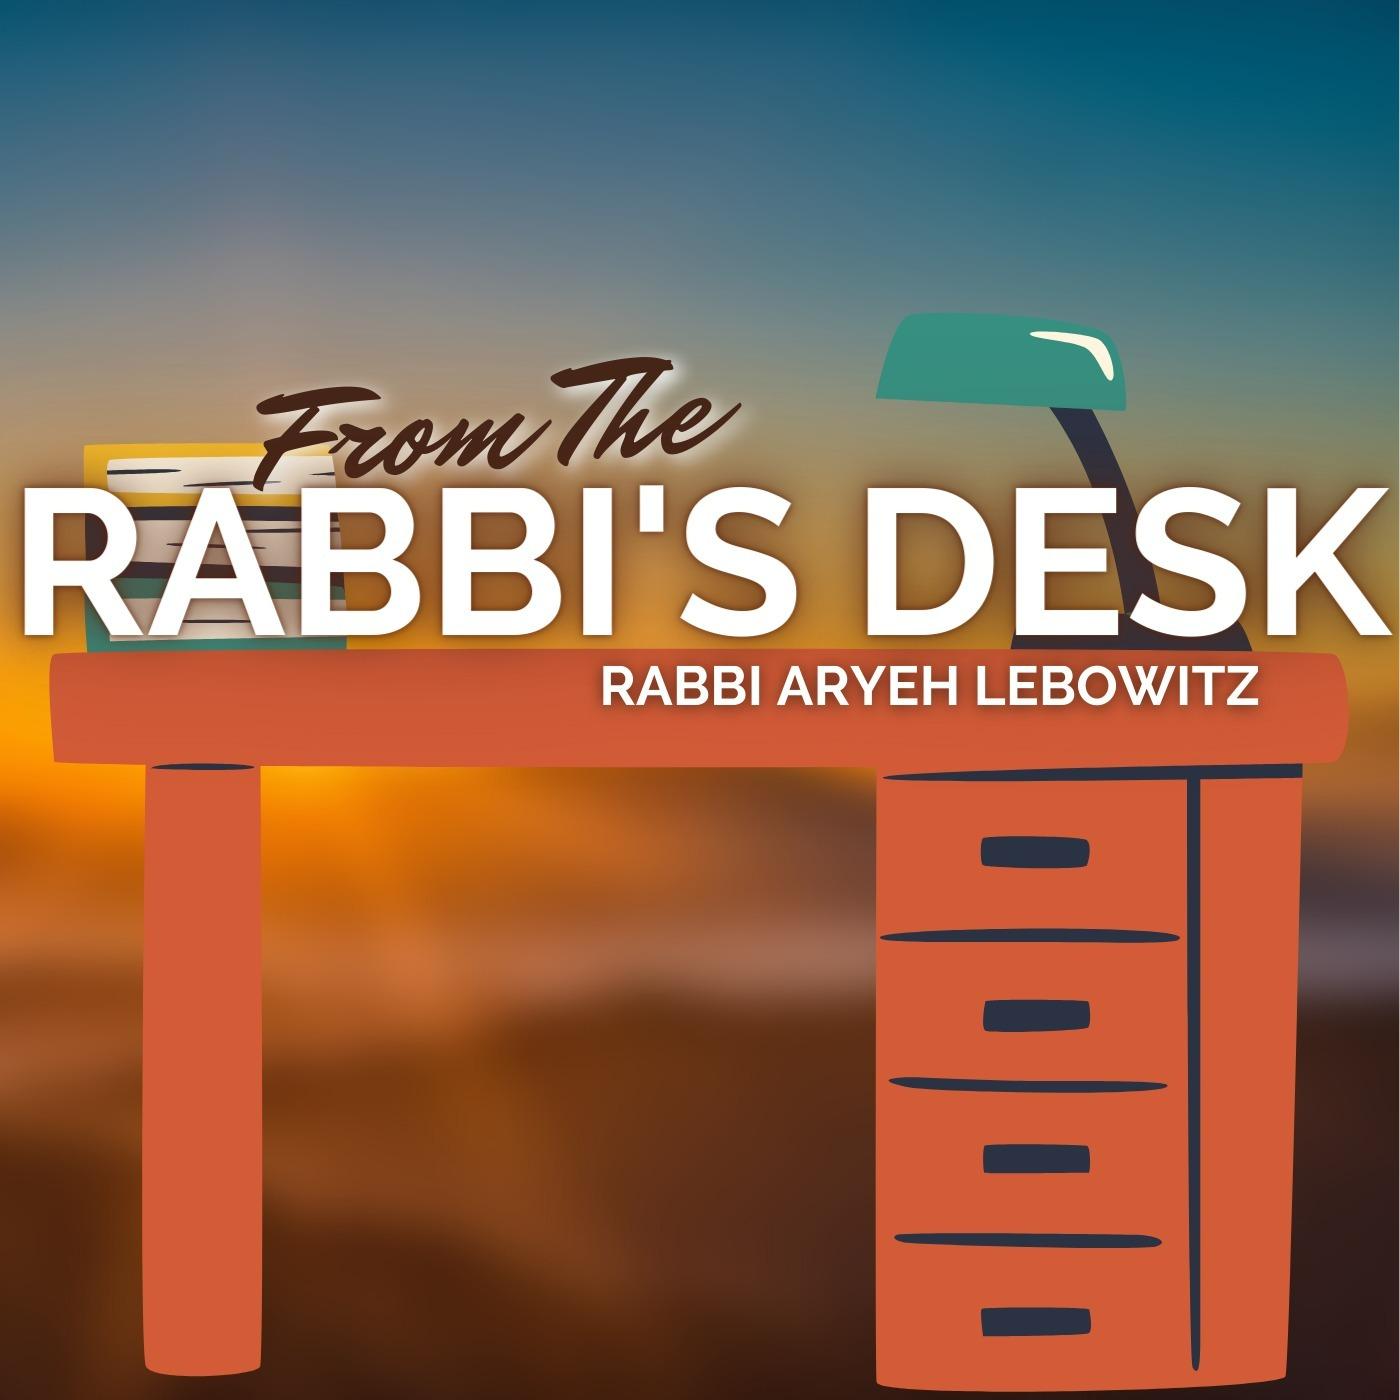 From The Rabbi's Desk